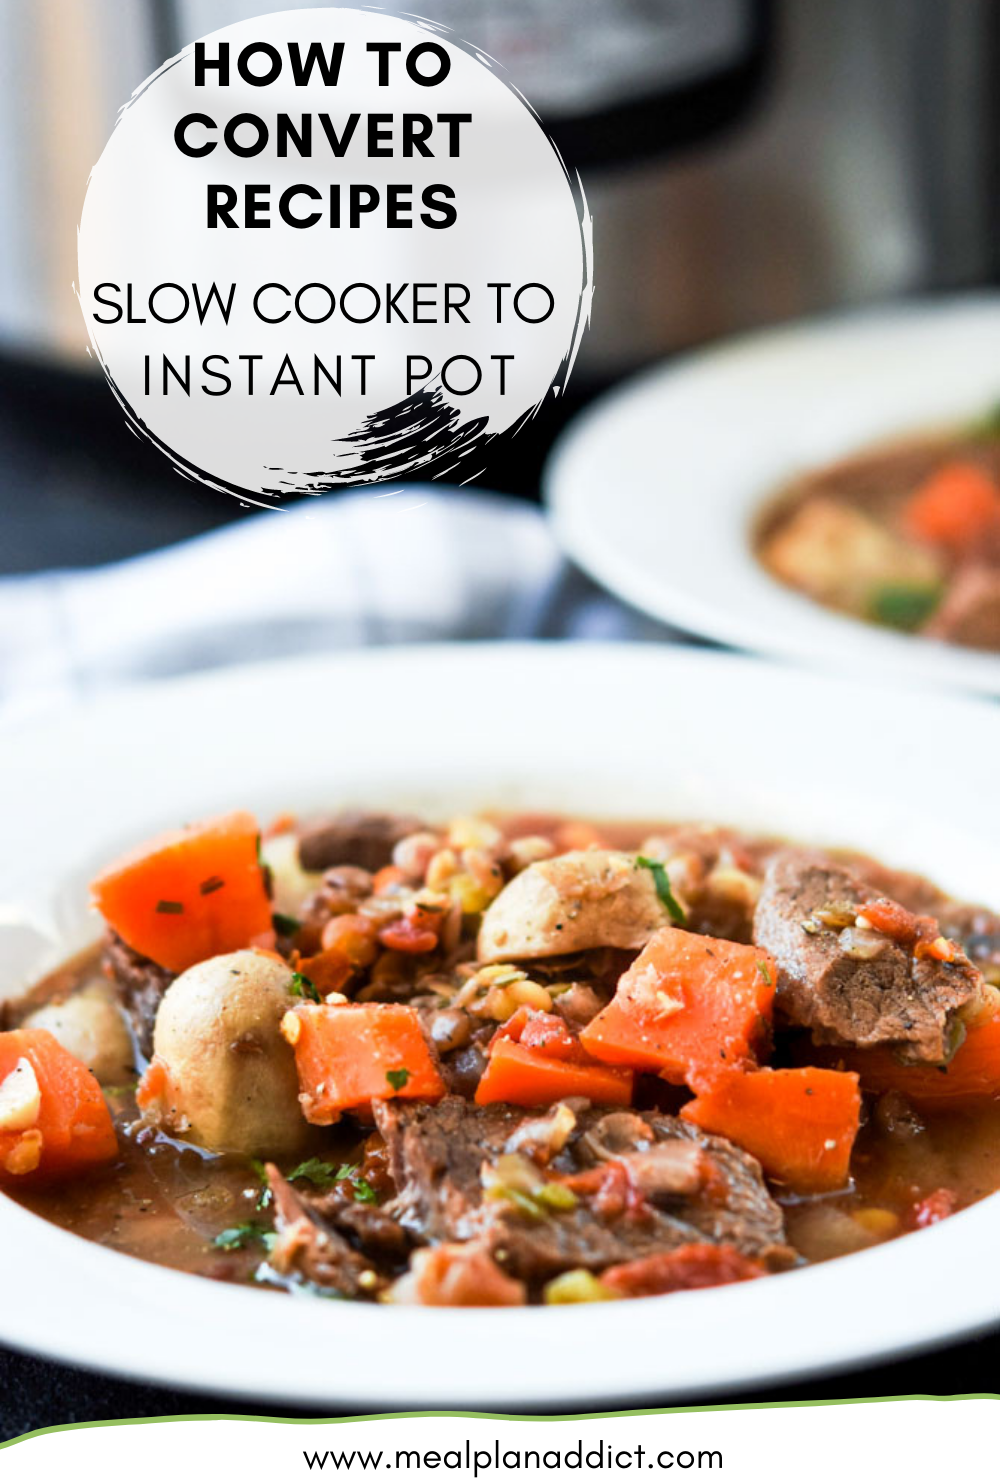 How to convert recipes: slow cooker to Instant Pot